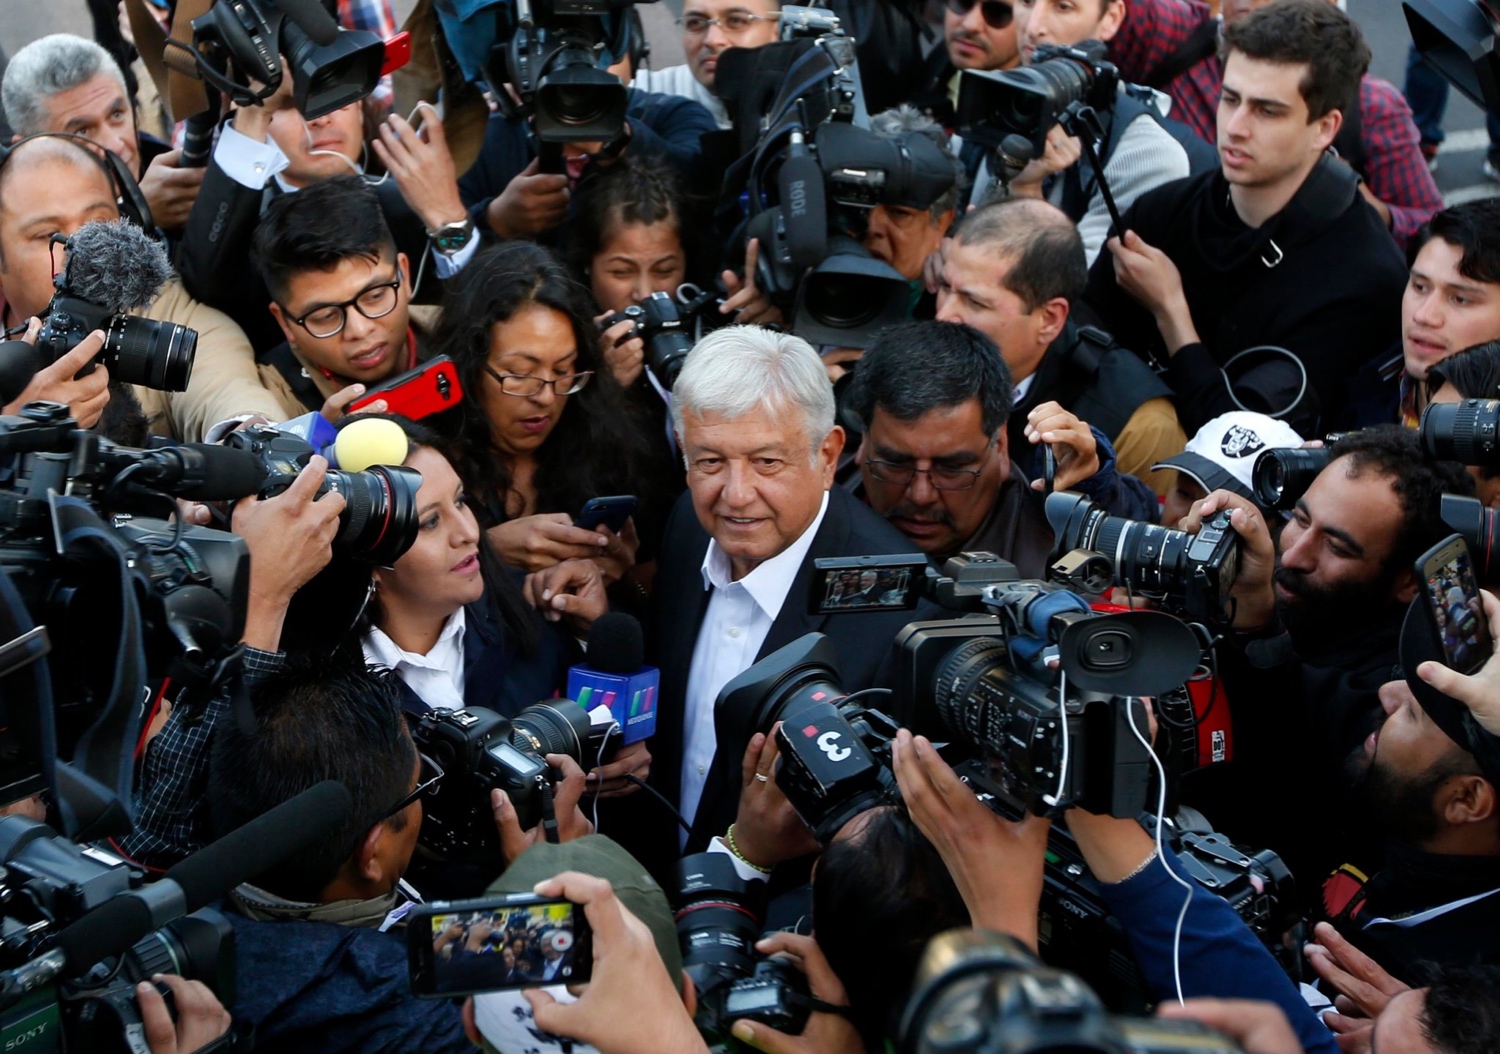 Andrés Manuel López Obrador campaigned on a narrative of social change, including increased pensions for the elderly, educational grants for Mexico’s youth and additional support for farmers.CreditCarlos Jasso/Reuters